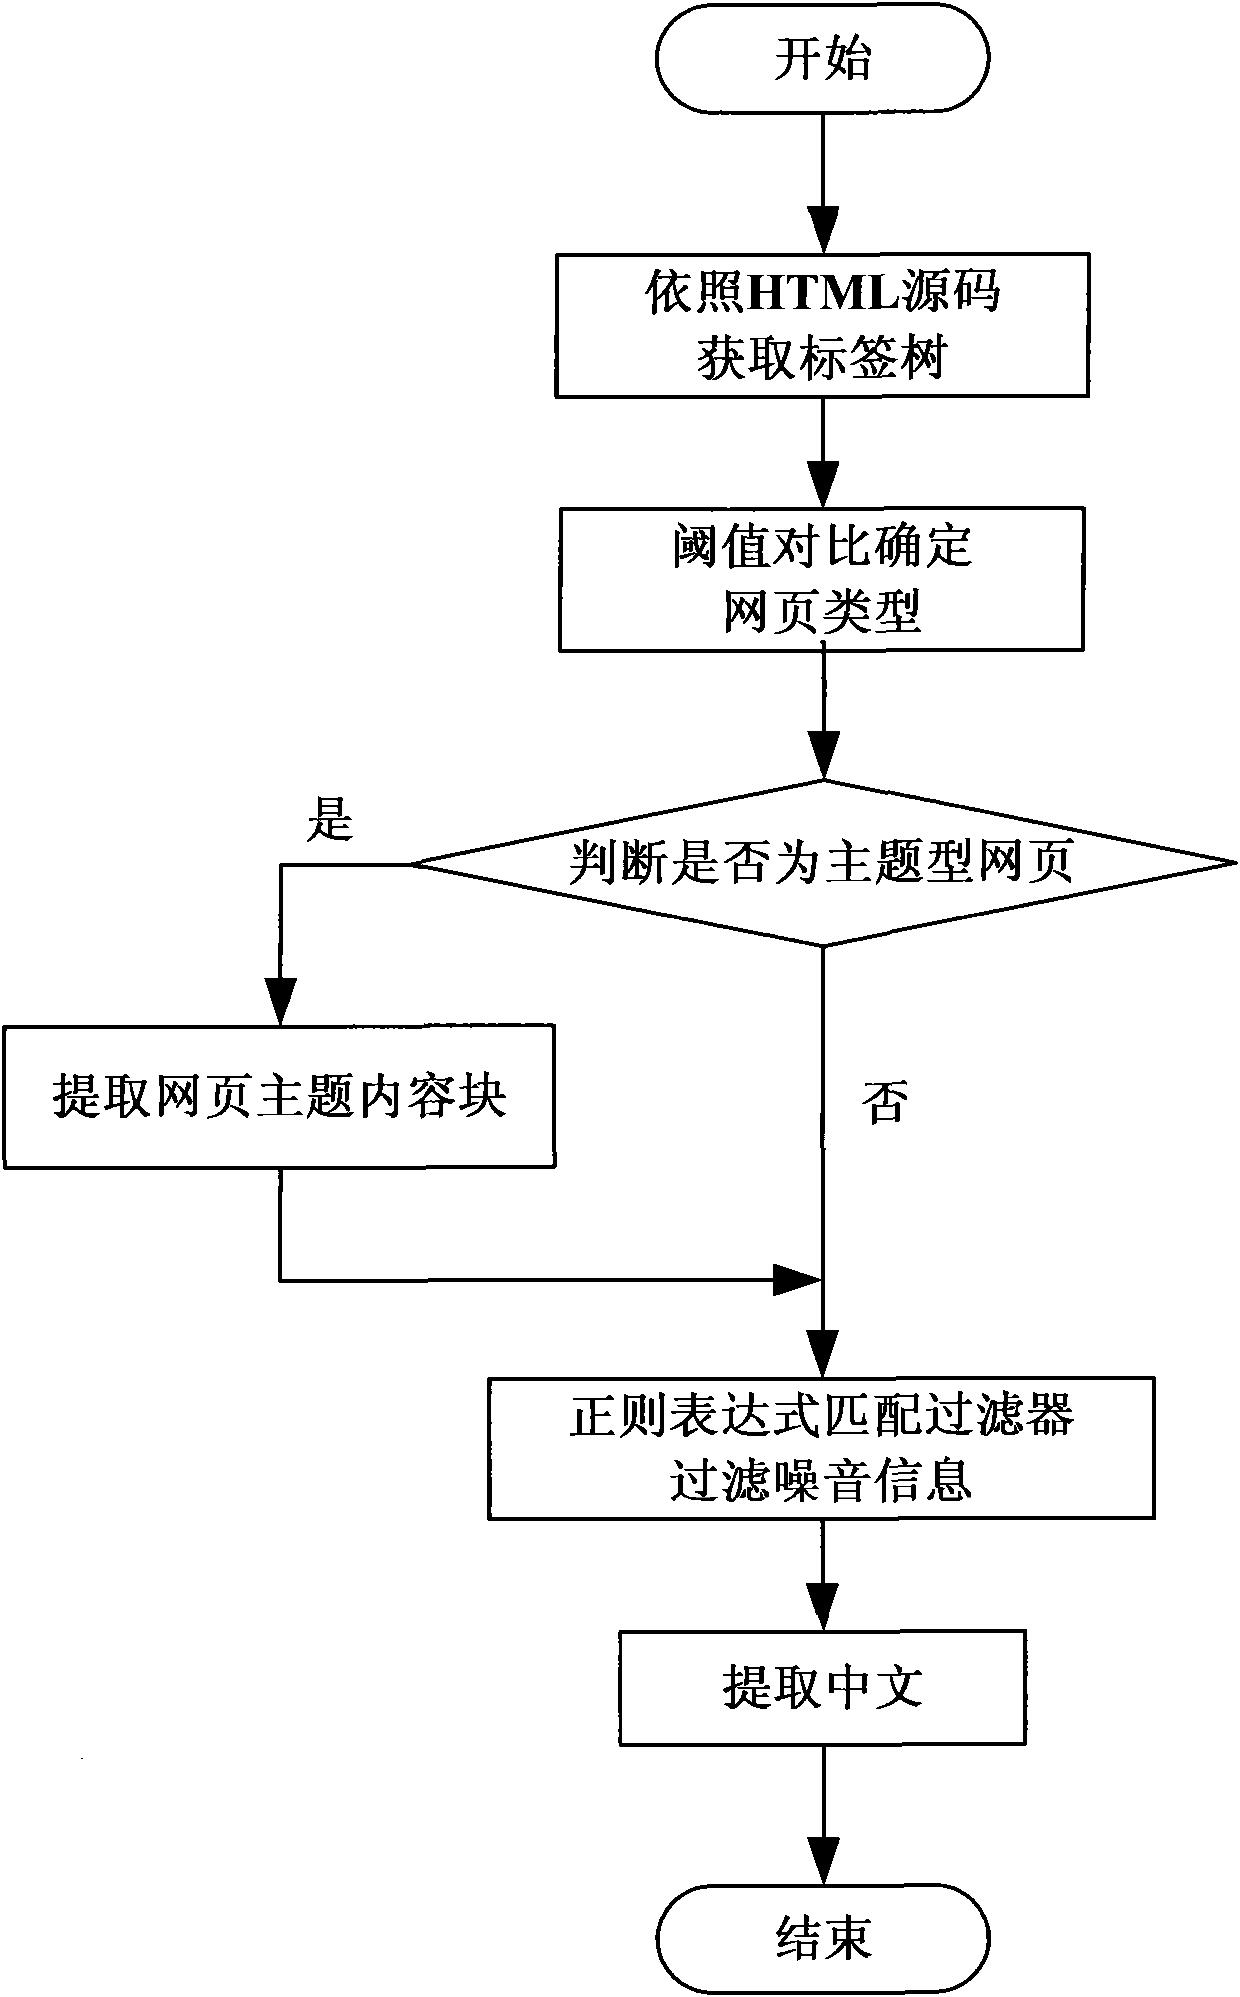 Fuzzy data mining based automatic classification method of Chinese web pages